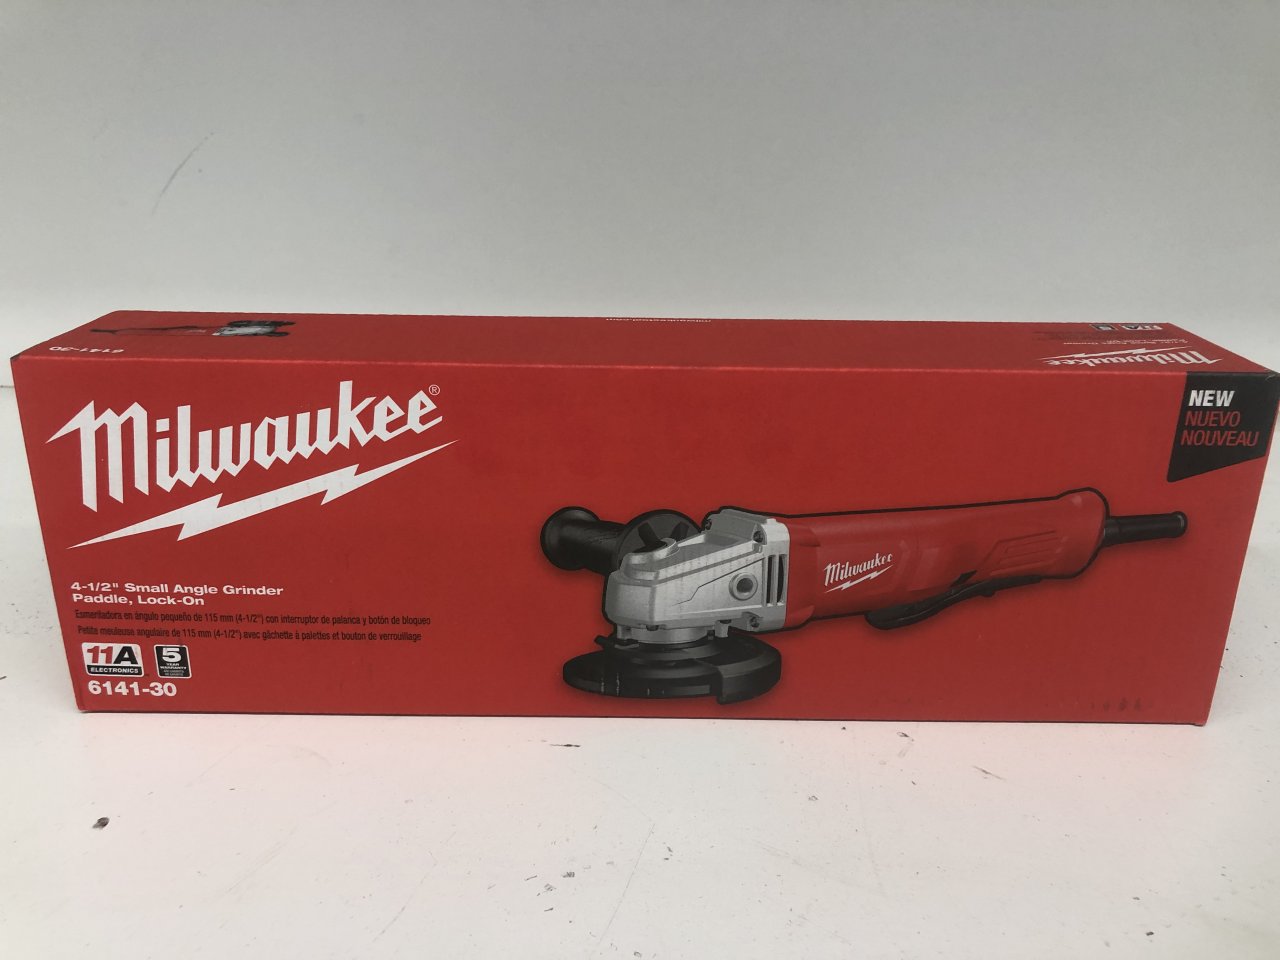 Milwaukee 11 Amp Corded 4-1/2 in. Small Angle Grinder with Lock-On